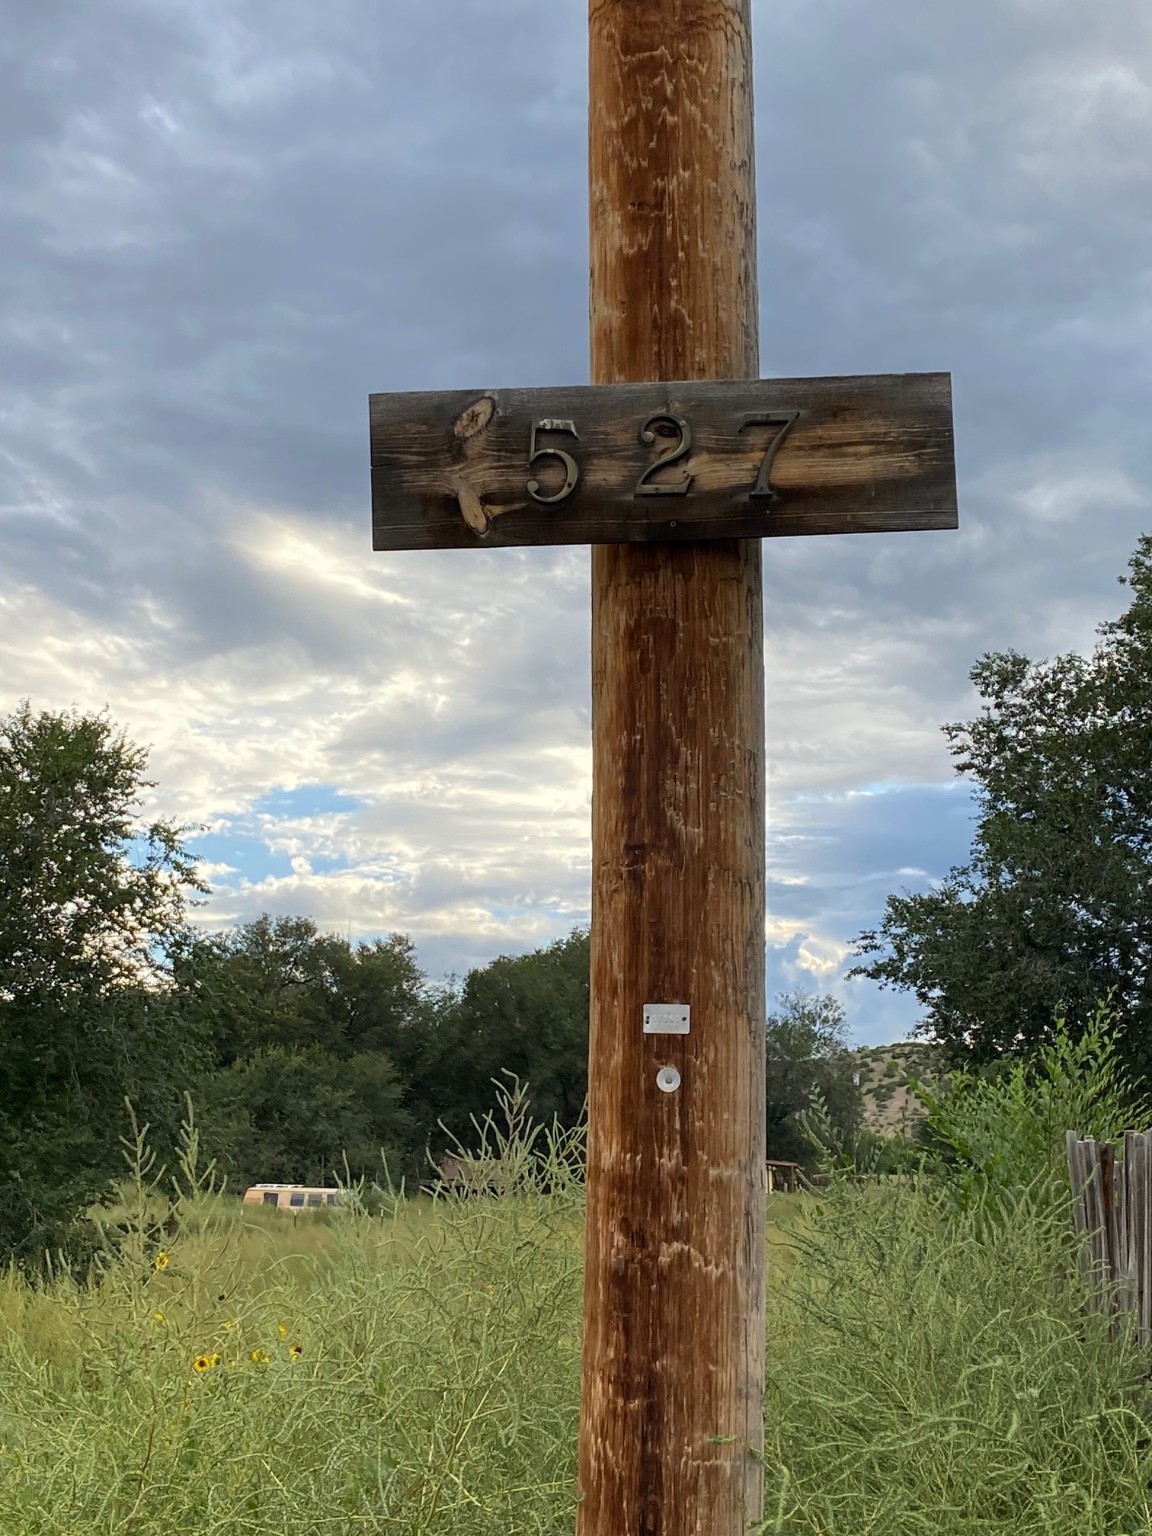 This is a old power pole that has an address sign on it. This property does not have an address yet, since it is vacant land.